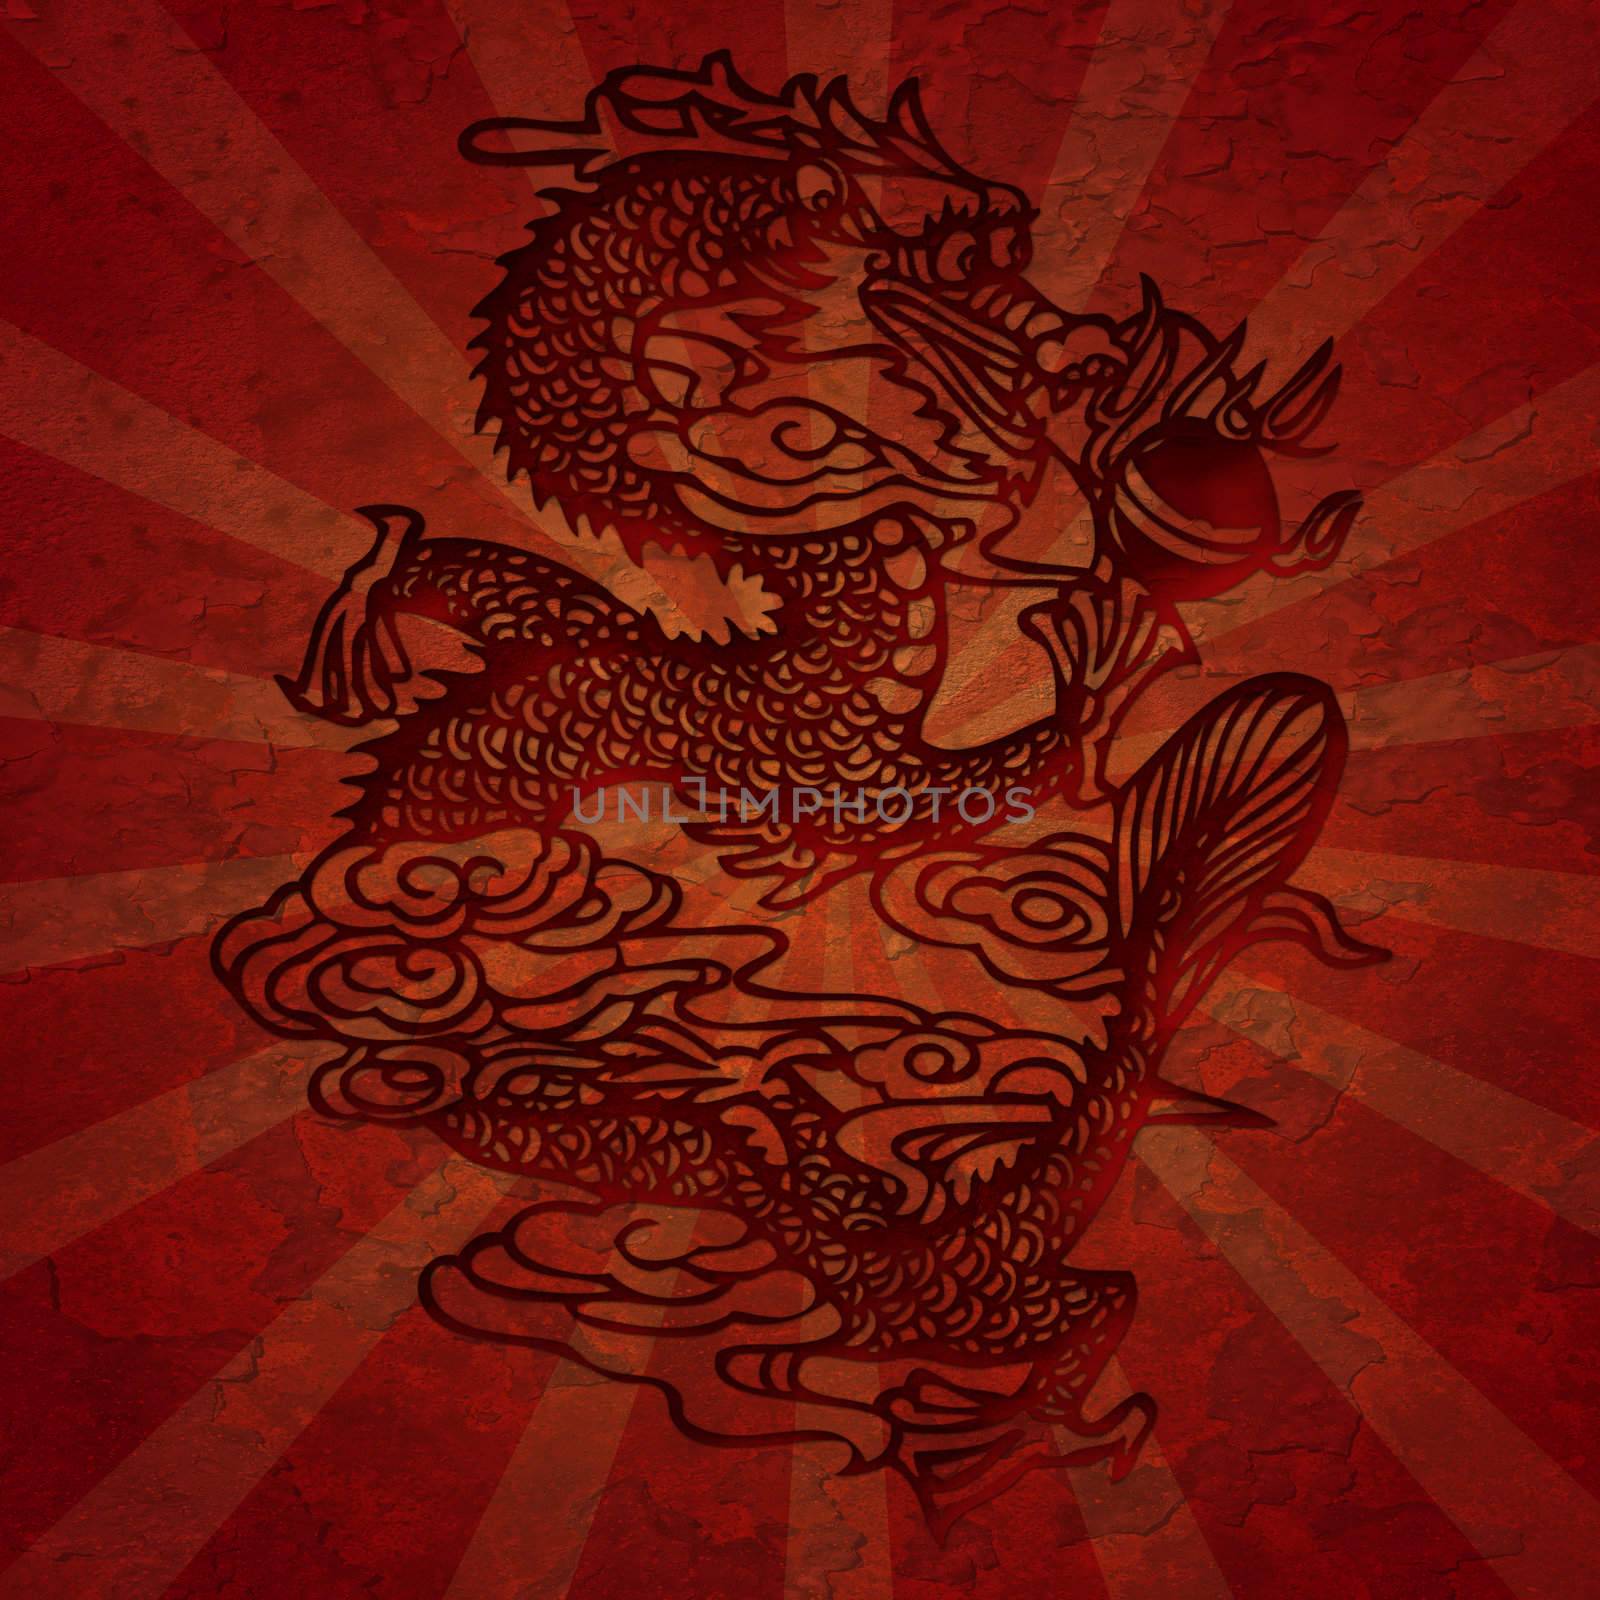 Paper Cutting Asian Dragon Grunge Texture with Rays Illustation